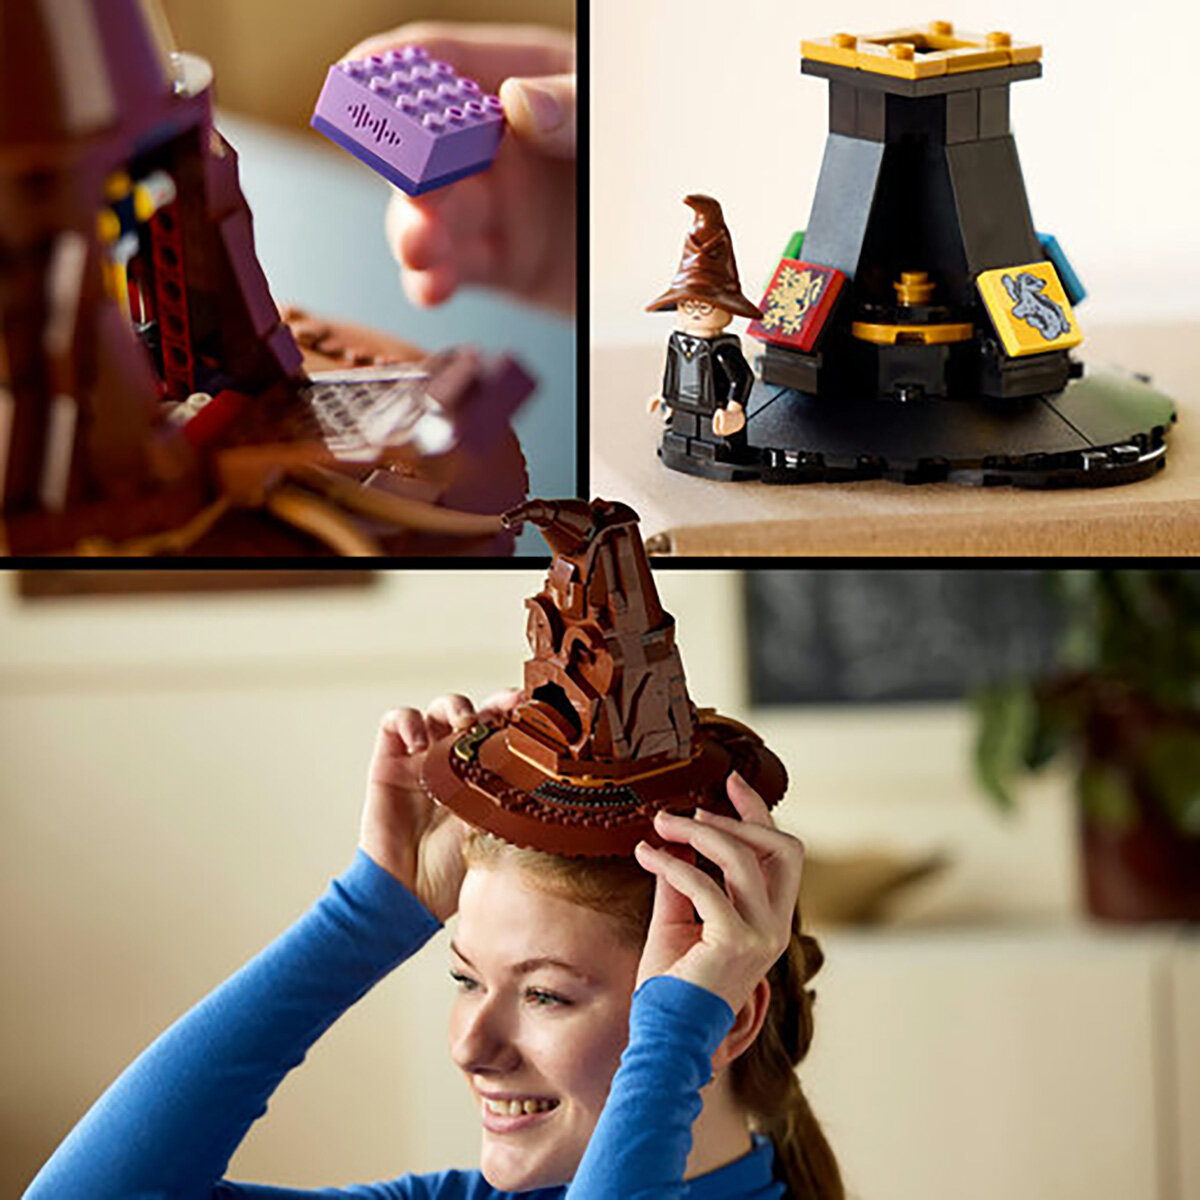 Buy LEGO Harry Potter Talking Sorting Hat Lifestyle Image at Costco.co.uk